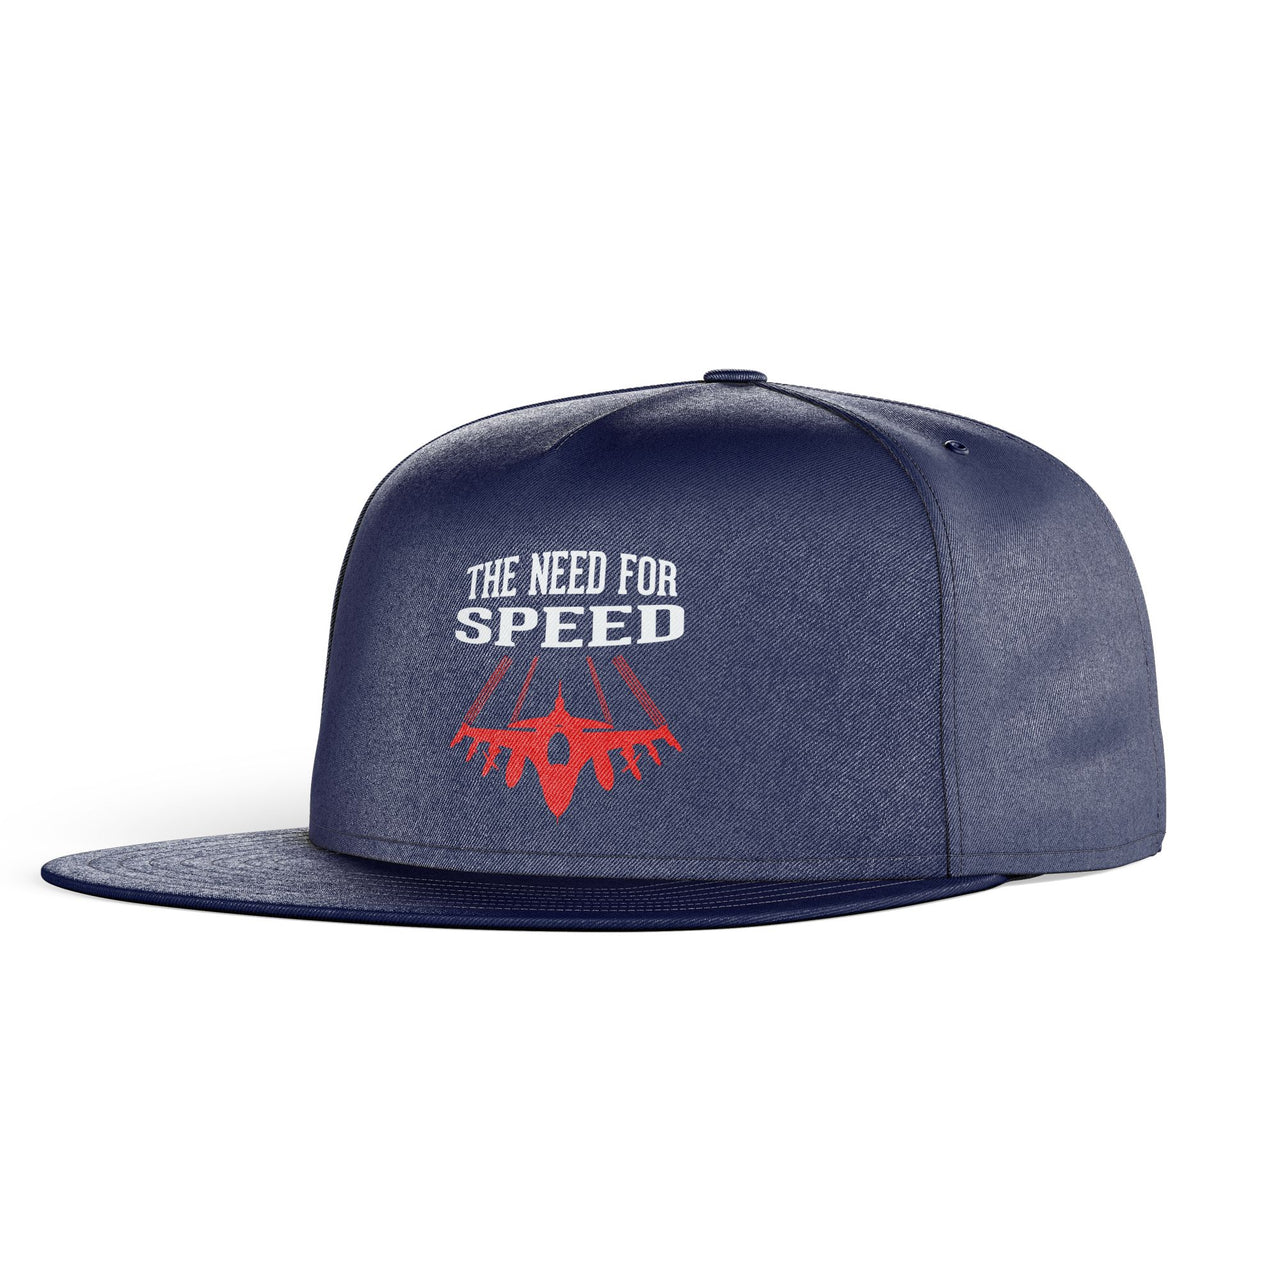 The Need For Speed Designed Snapback Caps & Hats